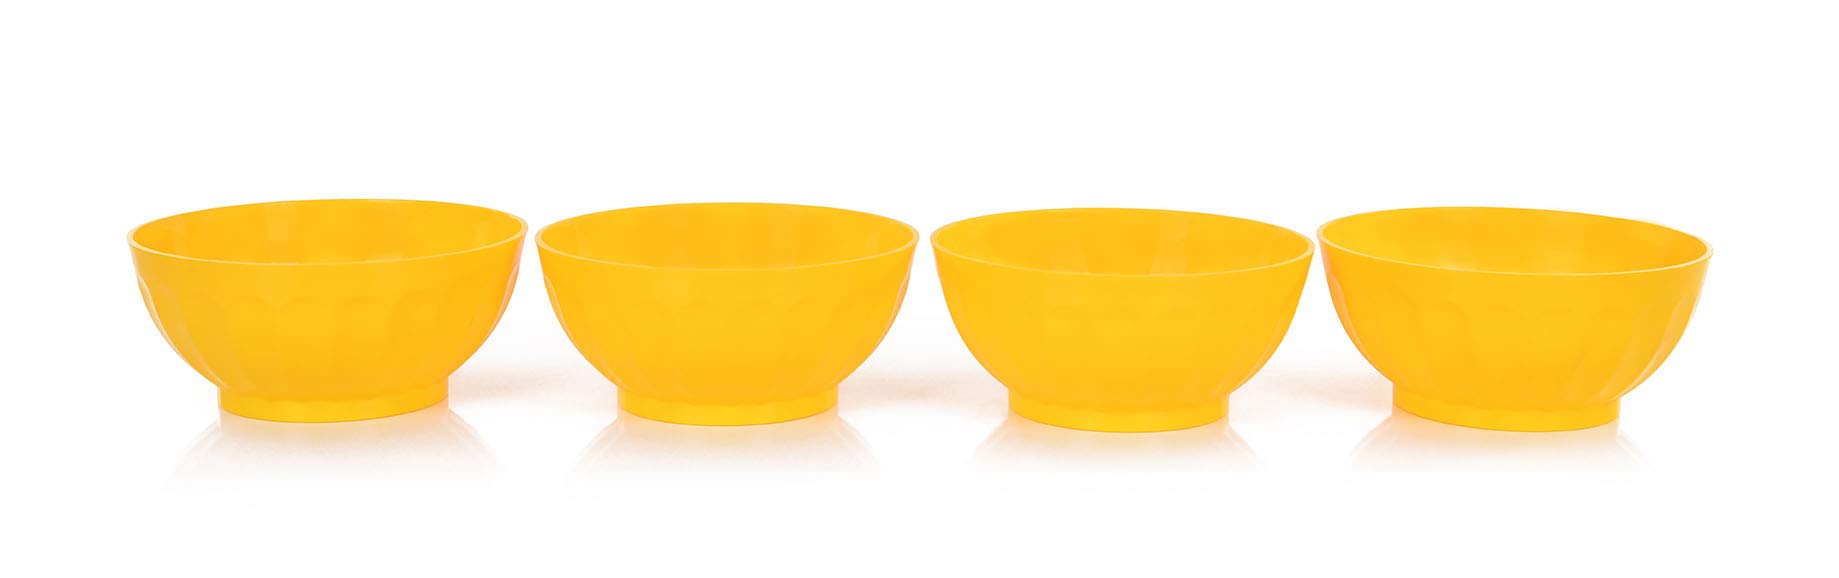 Mintra Unbreakable Plastic Bowl, YELLOW 4pk - Large, 1.8L, 60oz, 7.75inW x 3.25inH - (Part Of A Set) - Salad, Snacks, Breakfast Cereal, Fruit, Popcorn, Soup, Colorful, Shatterproof, BPA Free